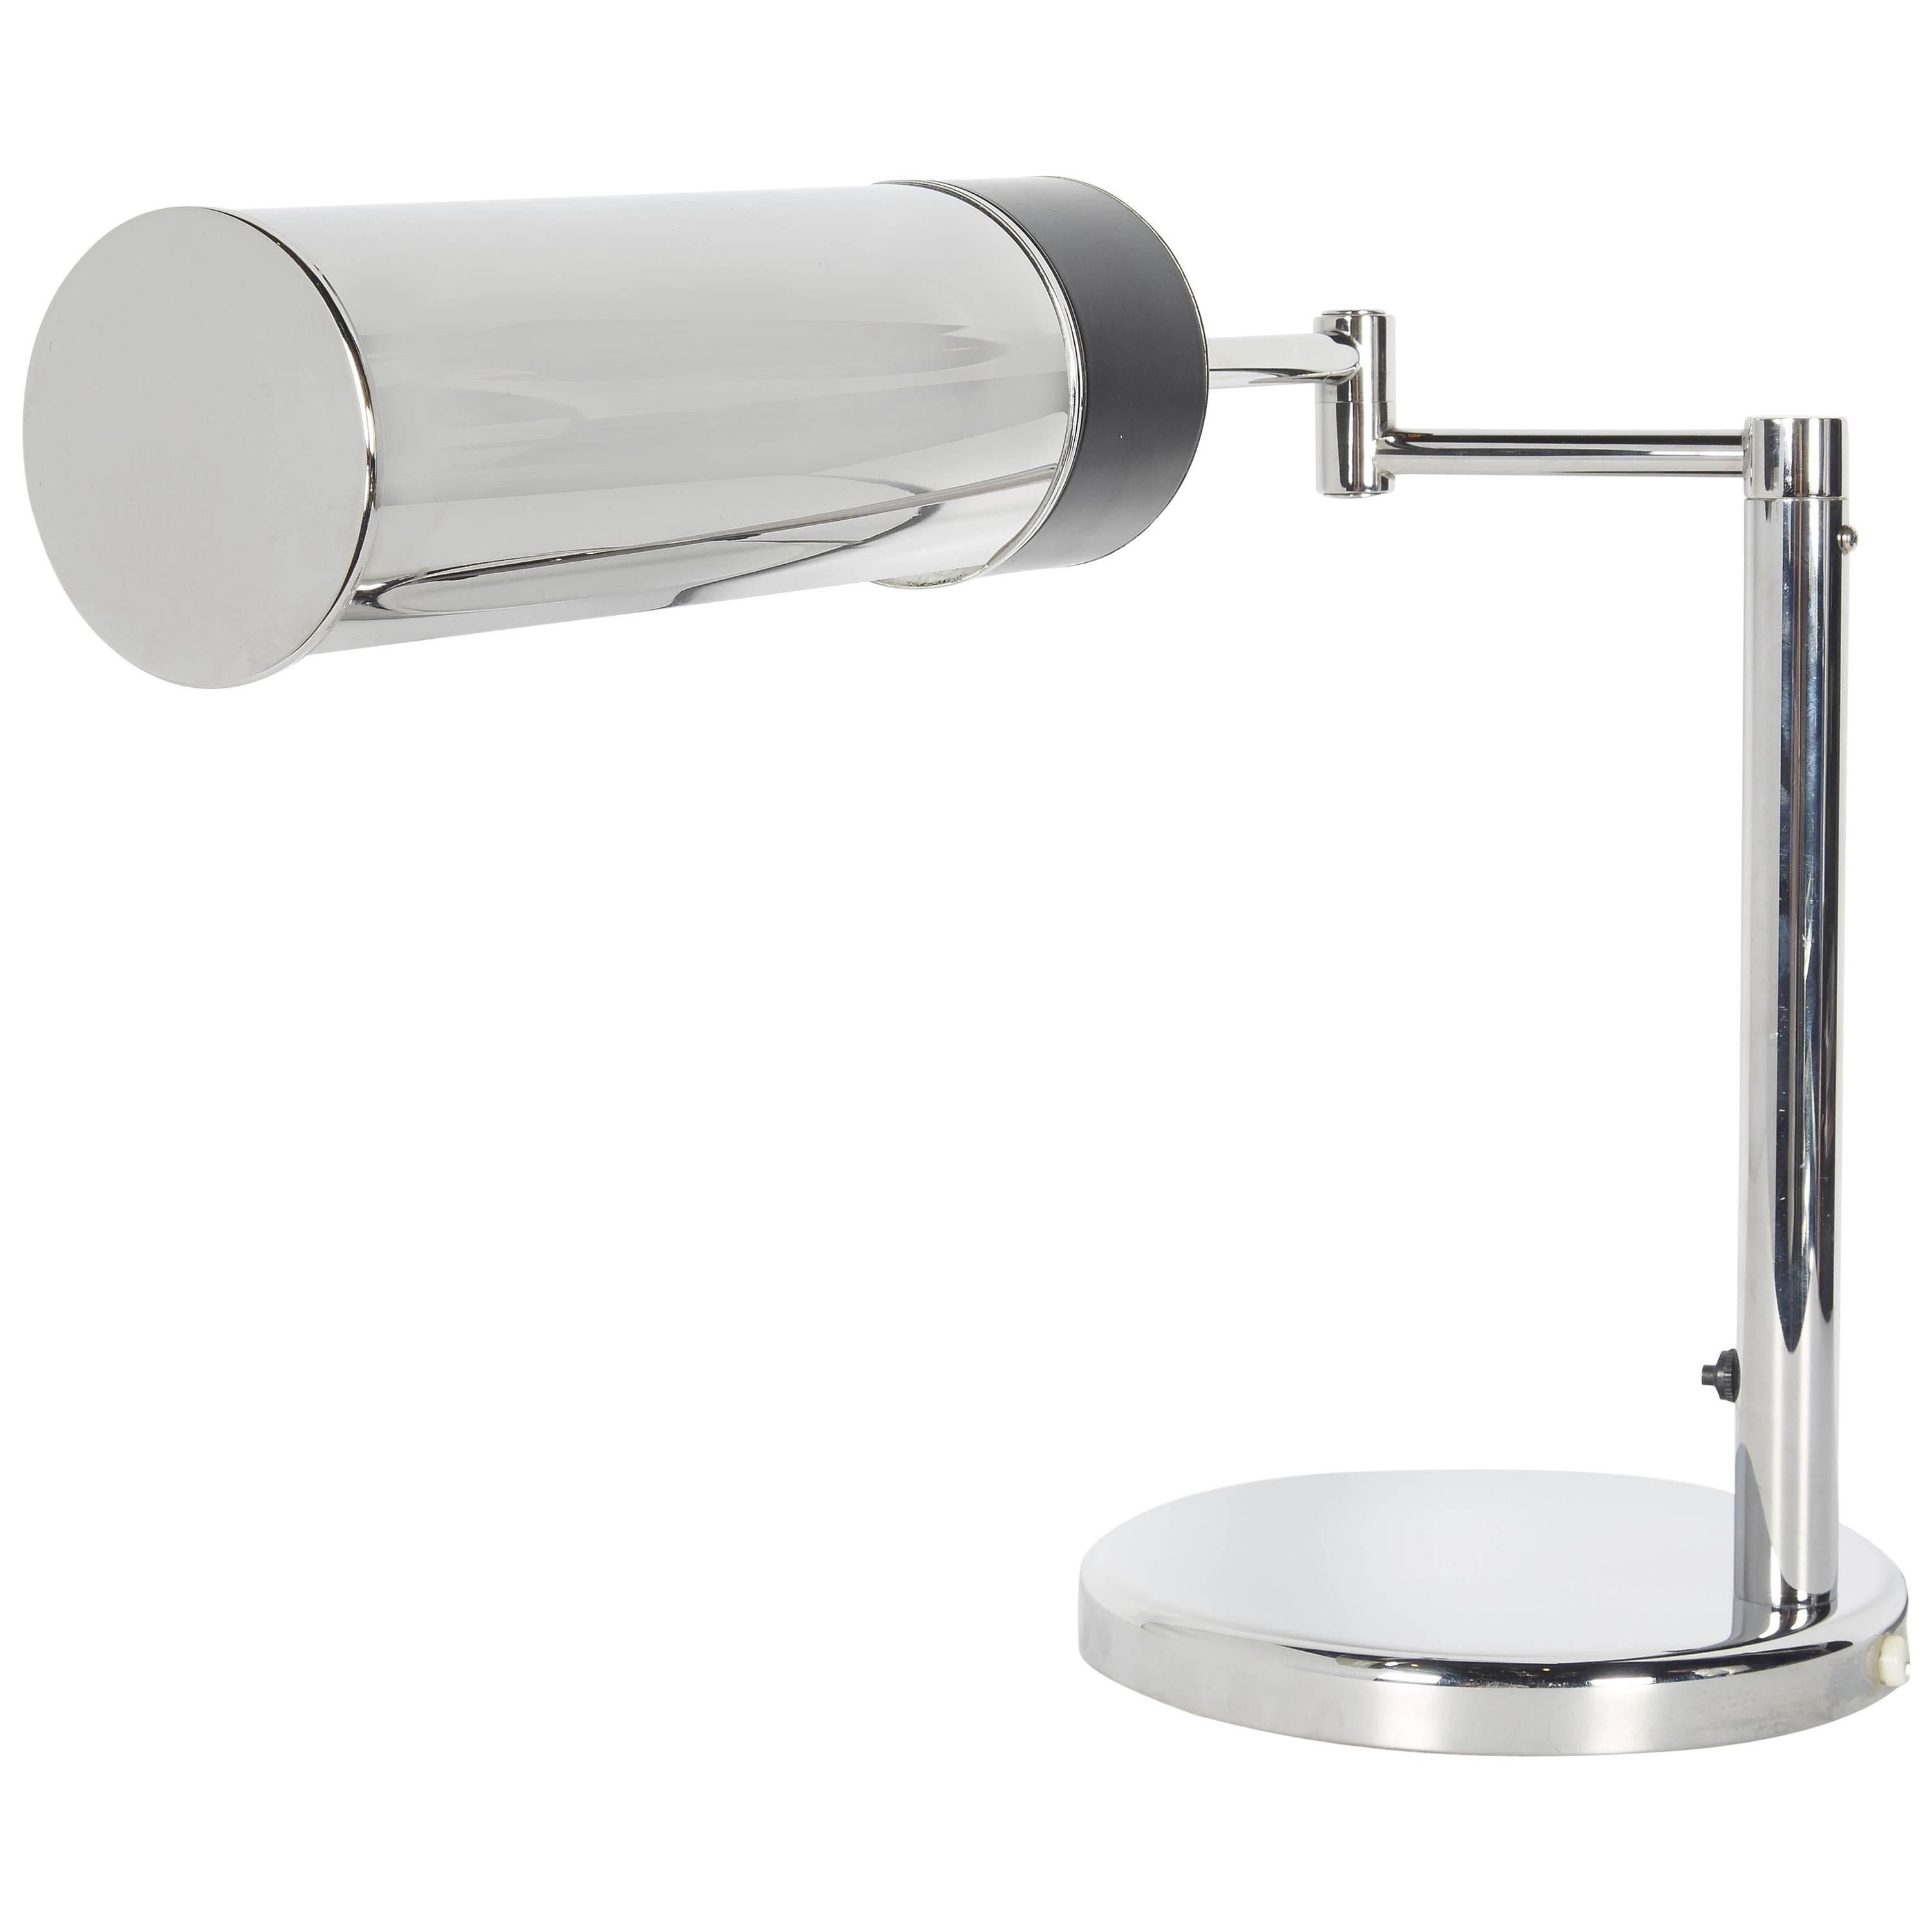 Mid-Century Modern Walter Von Nessen for Nessen Studio desk lamp. Features swing arm design and adjustable shade. The lamp has a sleek cylinder shade with circular base in polished chrome and features black enameled metal accent. Fitted with on/off